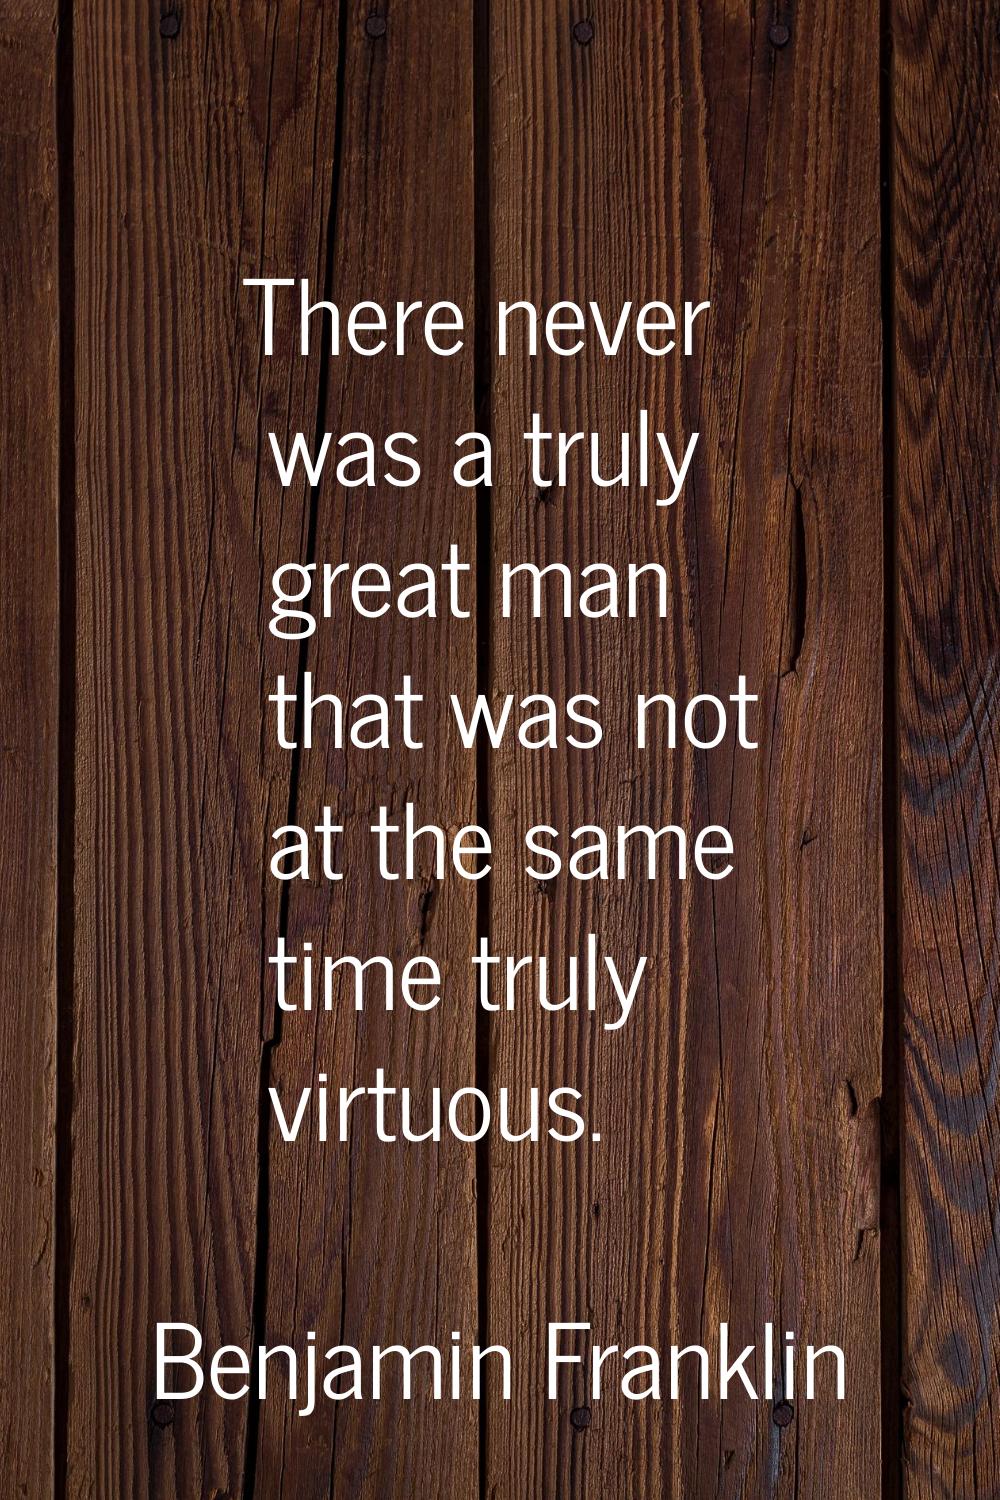 There never was a truly great man that was not at the same time truly virtuous.